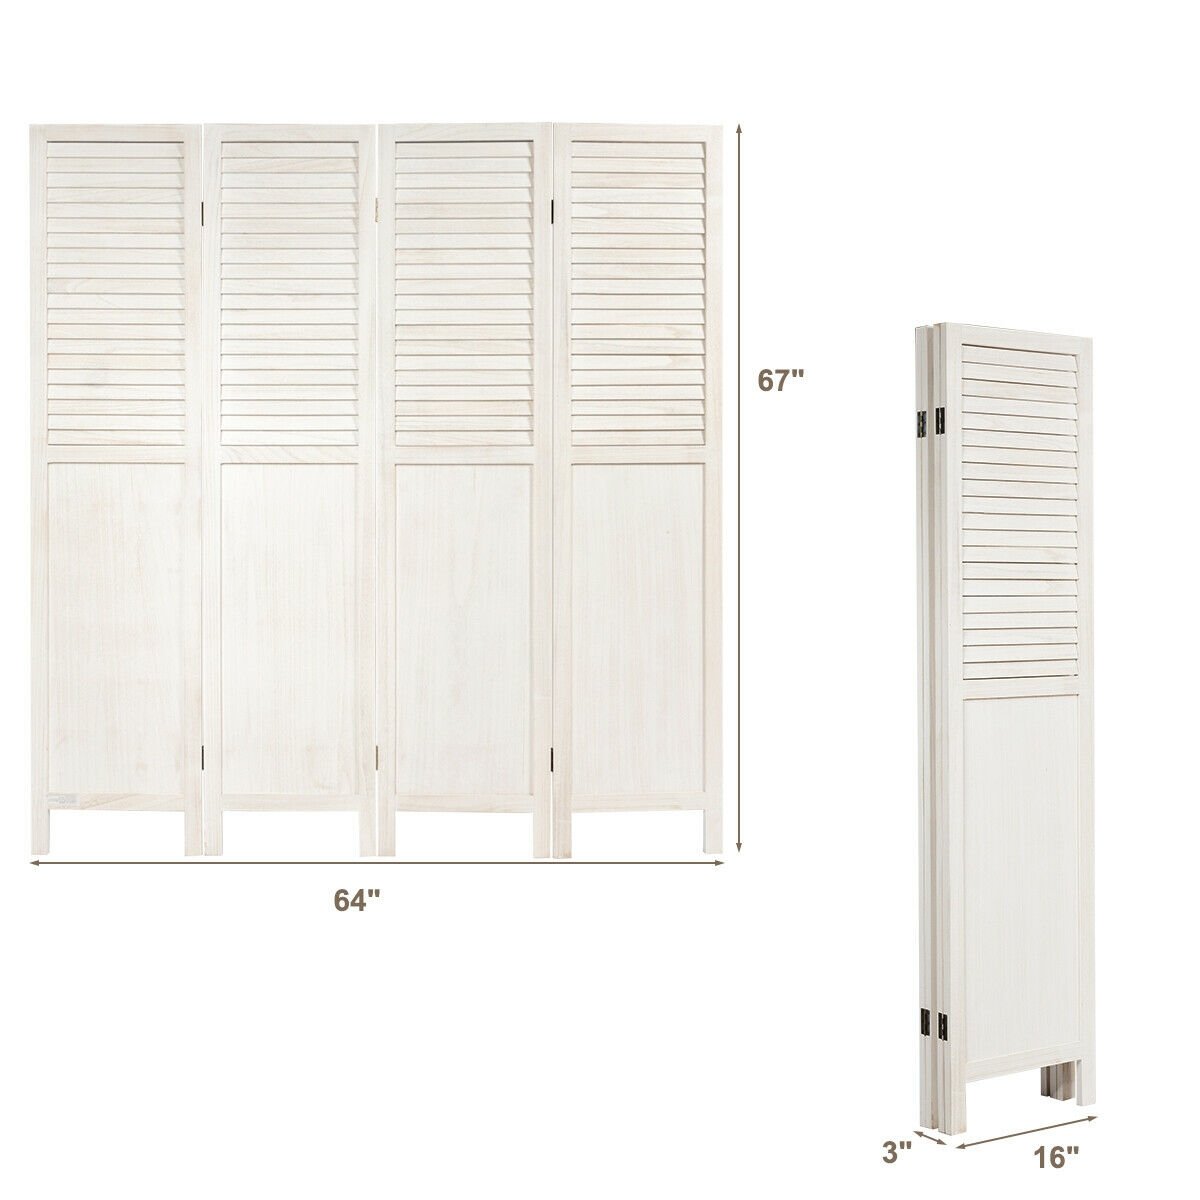 5.6 Ft Tall 4 Panel Folding Privacy Room Divider, White - Gallery Canada